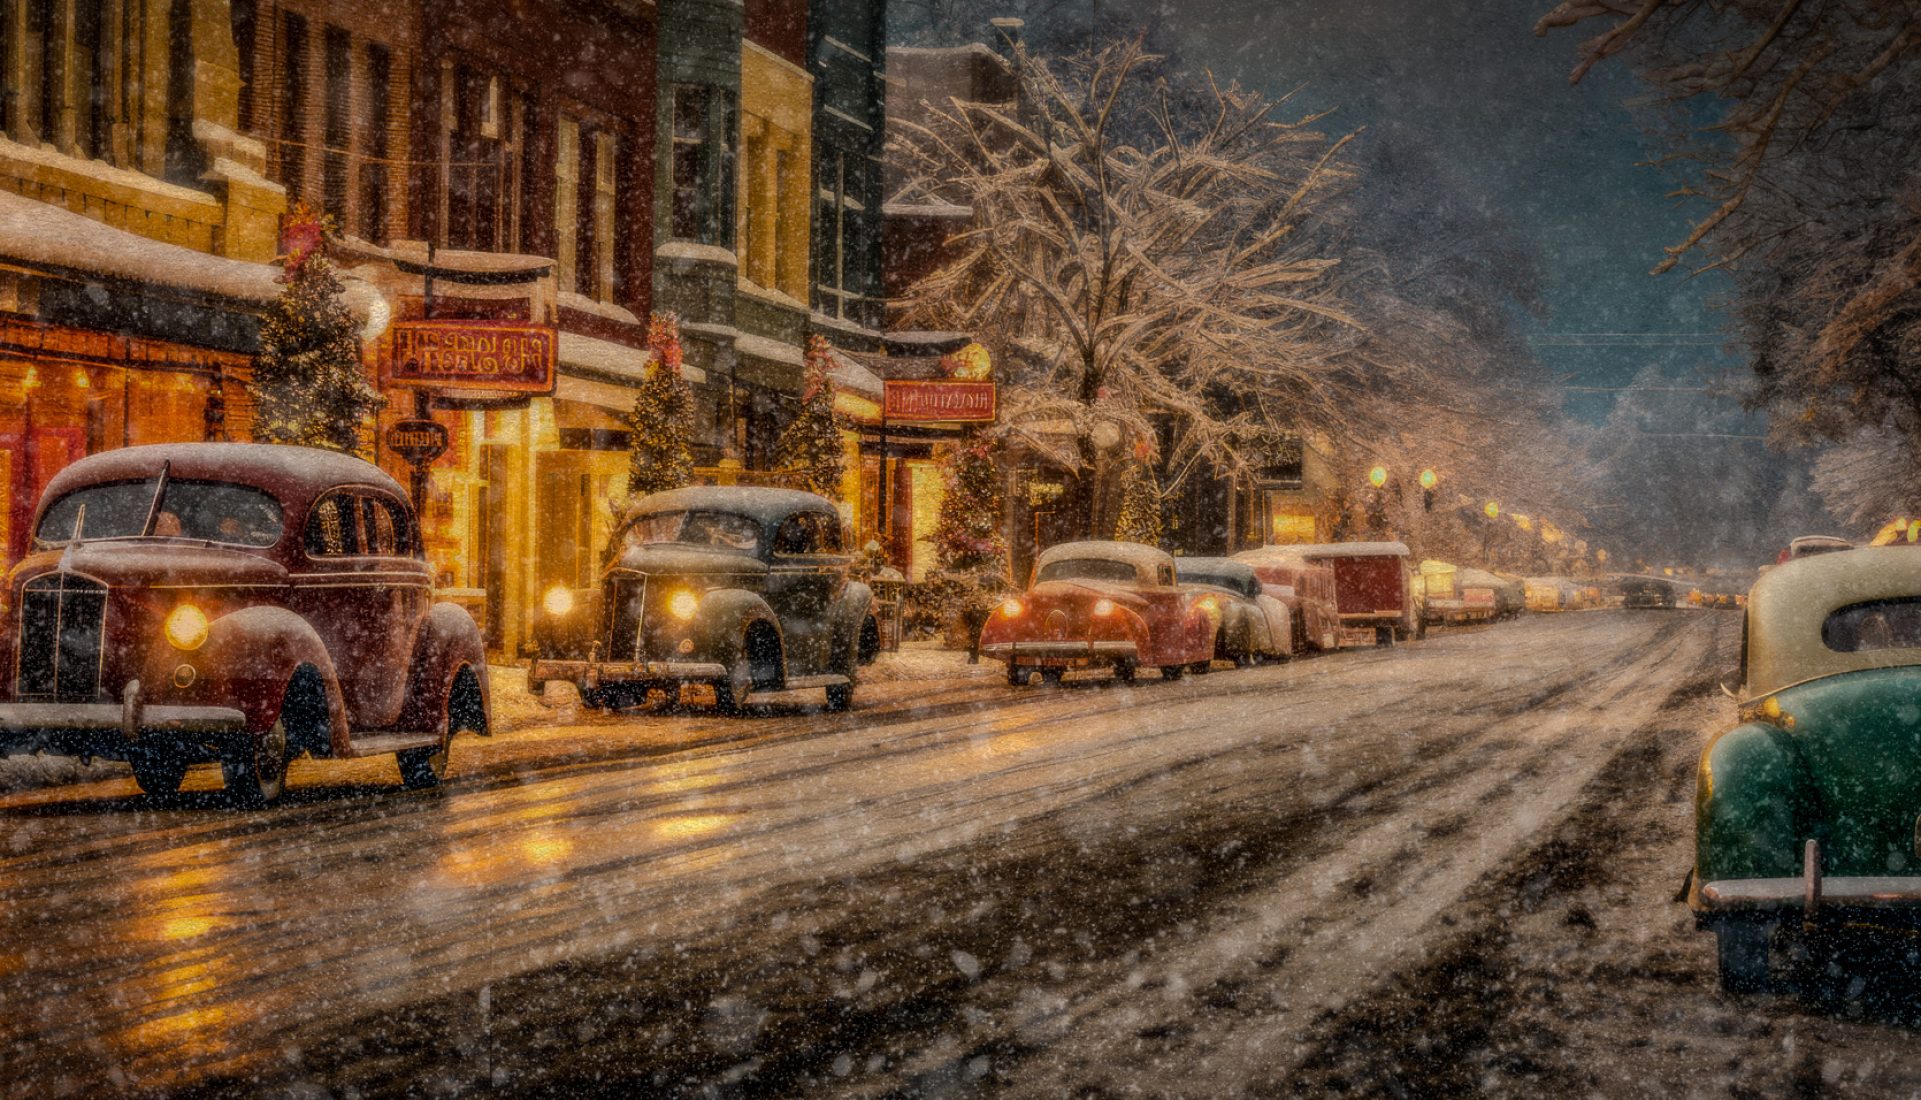 Small Town Christmas – Remembering Currier and Ives